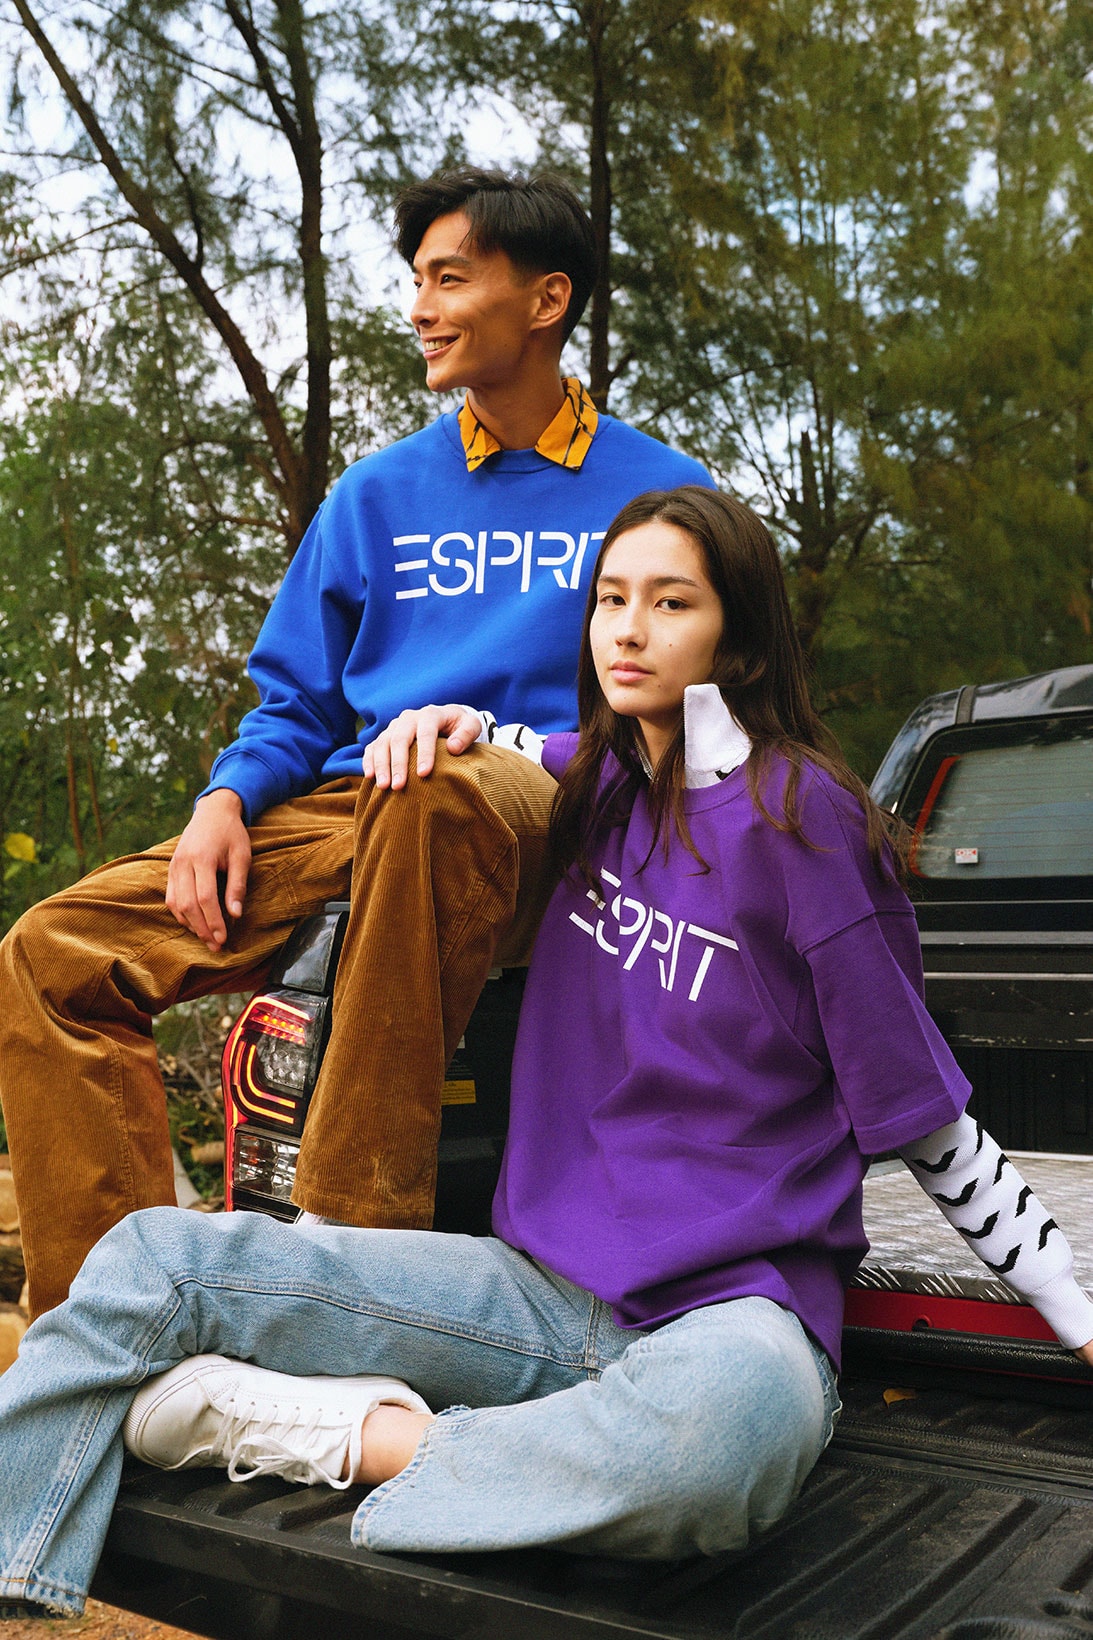 ESPRIT Archive Re-Issue Capsule Collection Sweatshirts T-Shirts